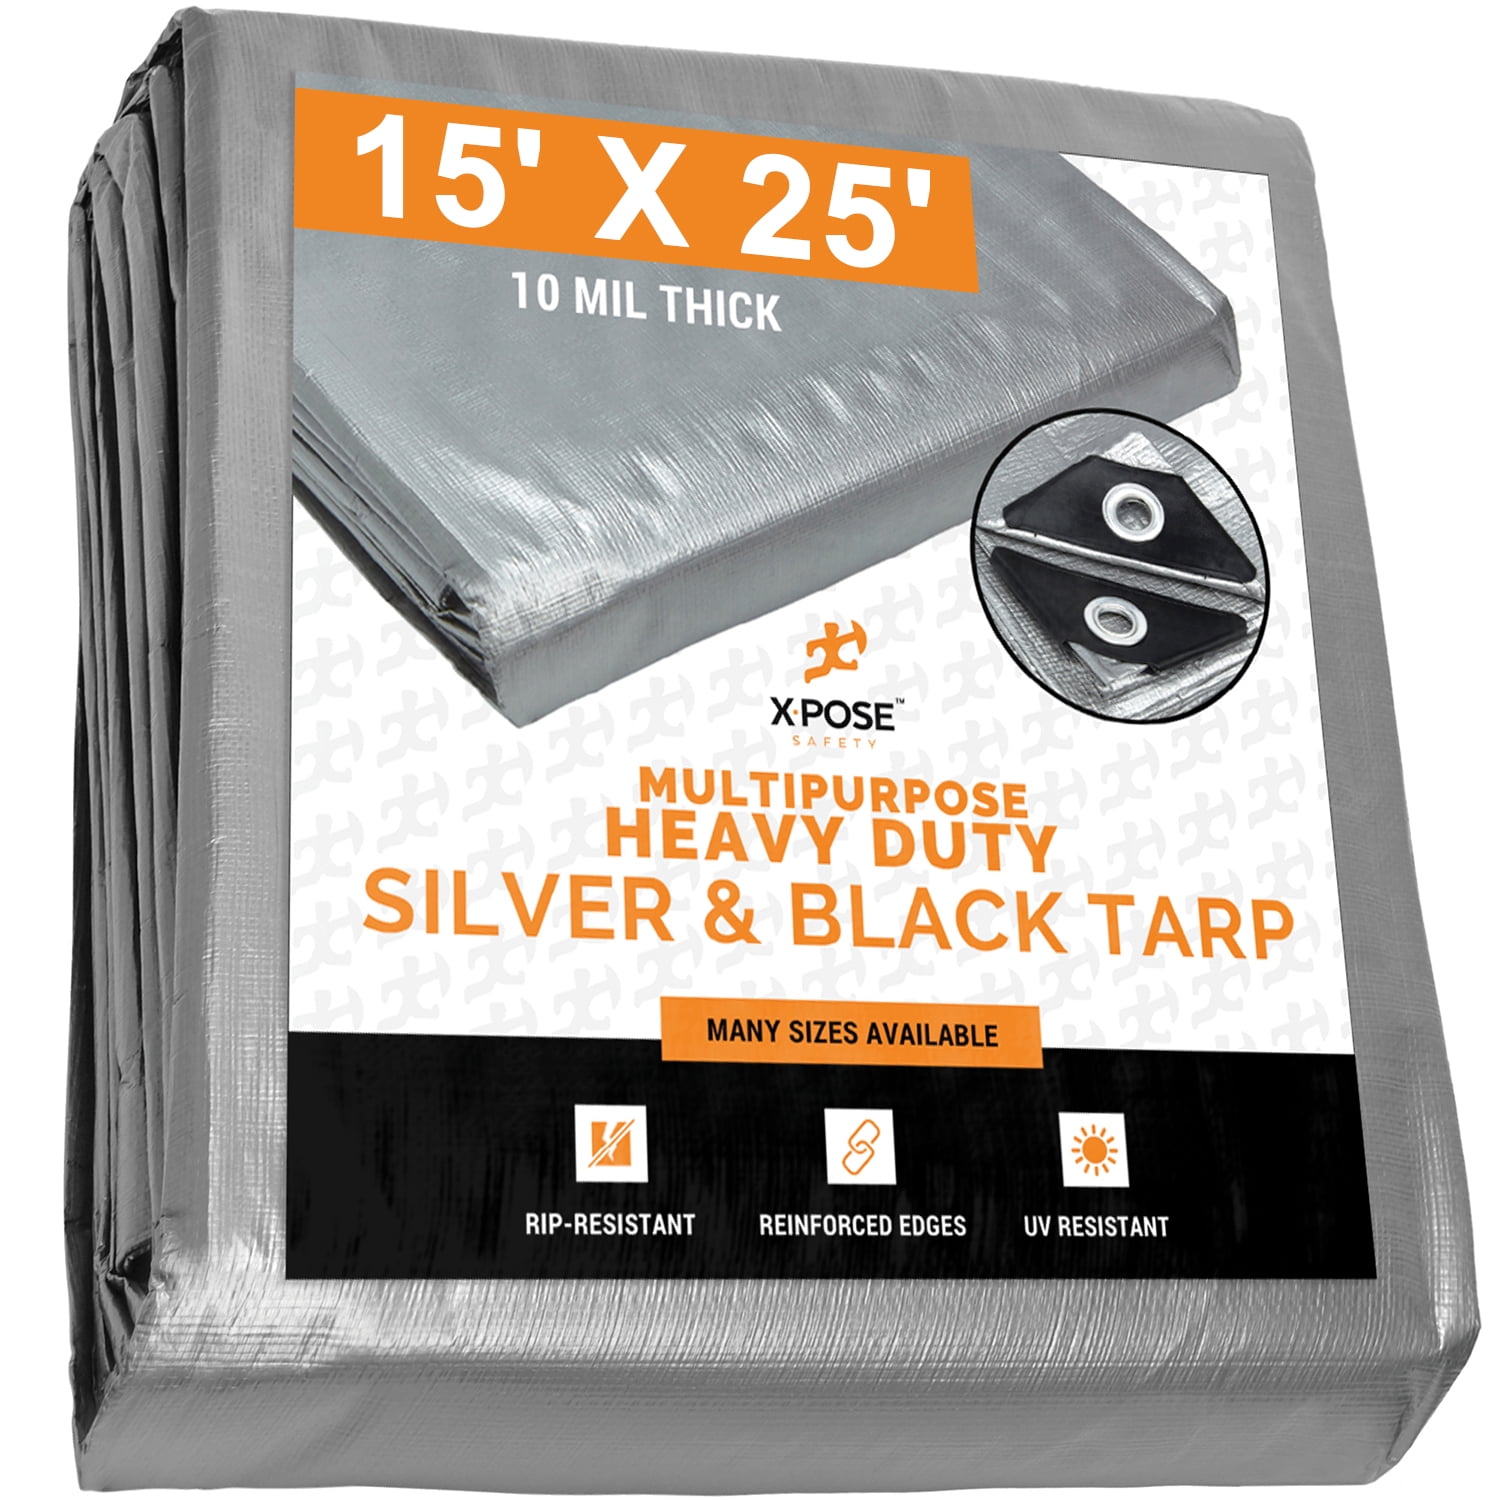 16' X 16' SILVER PREMIUM 14 MIL EXTREME DUTY POLY TARP Free Shipping 5% OFF 2+